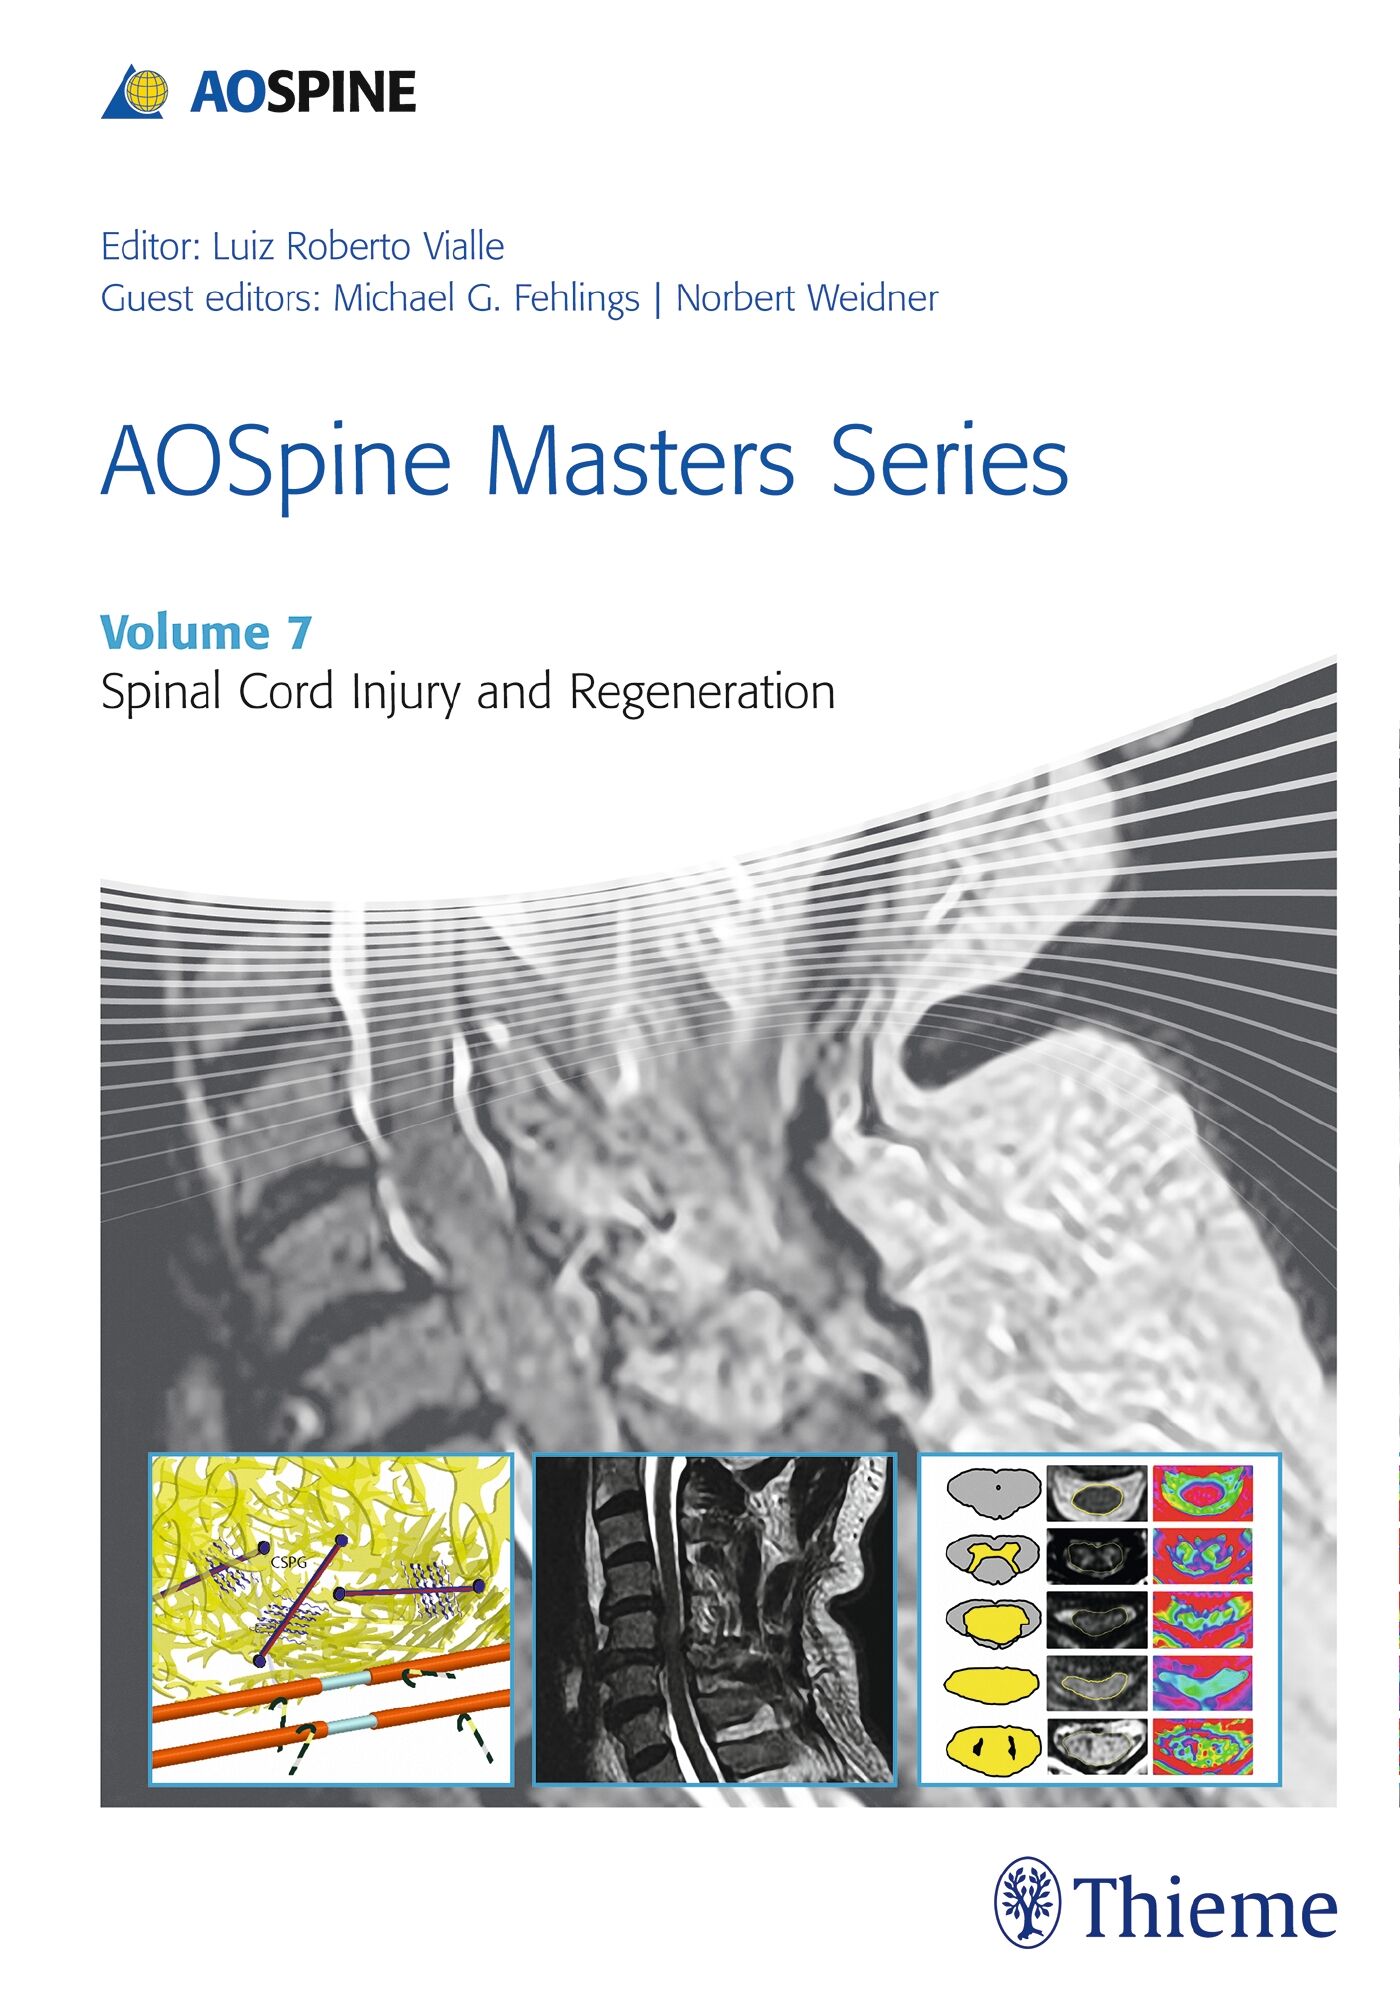 AOSpine Masters Series, Volume 7: Spinal Cord Injury and Regeneration, 9781626232273